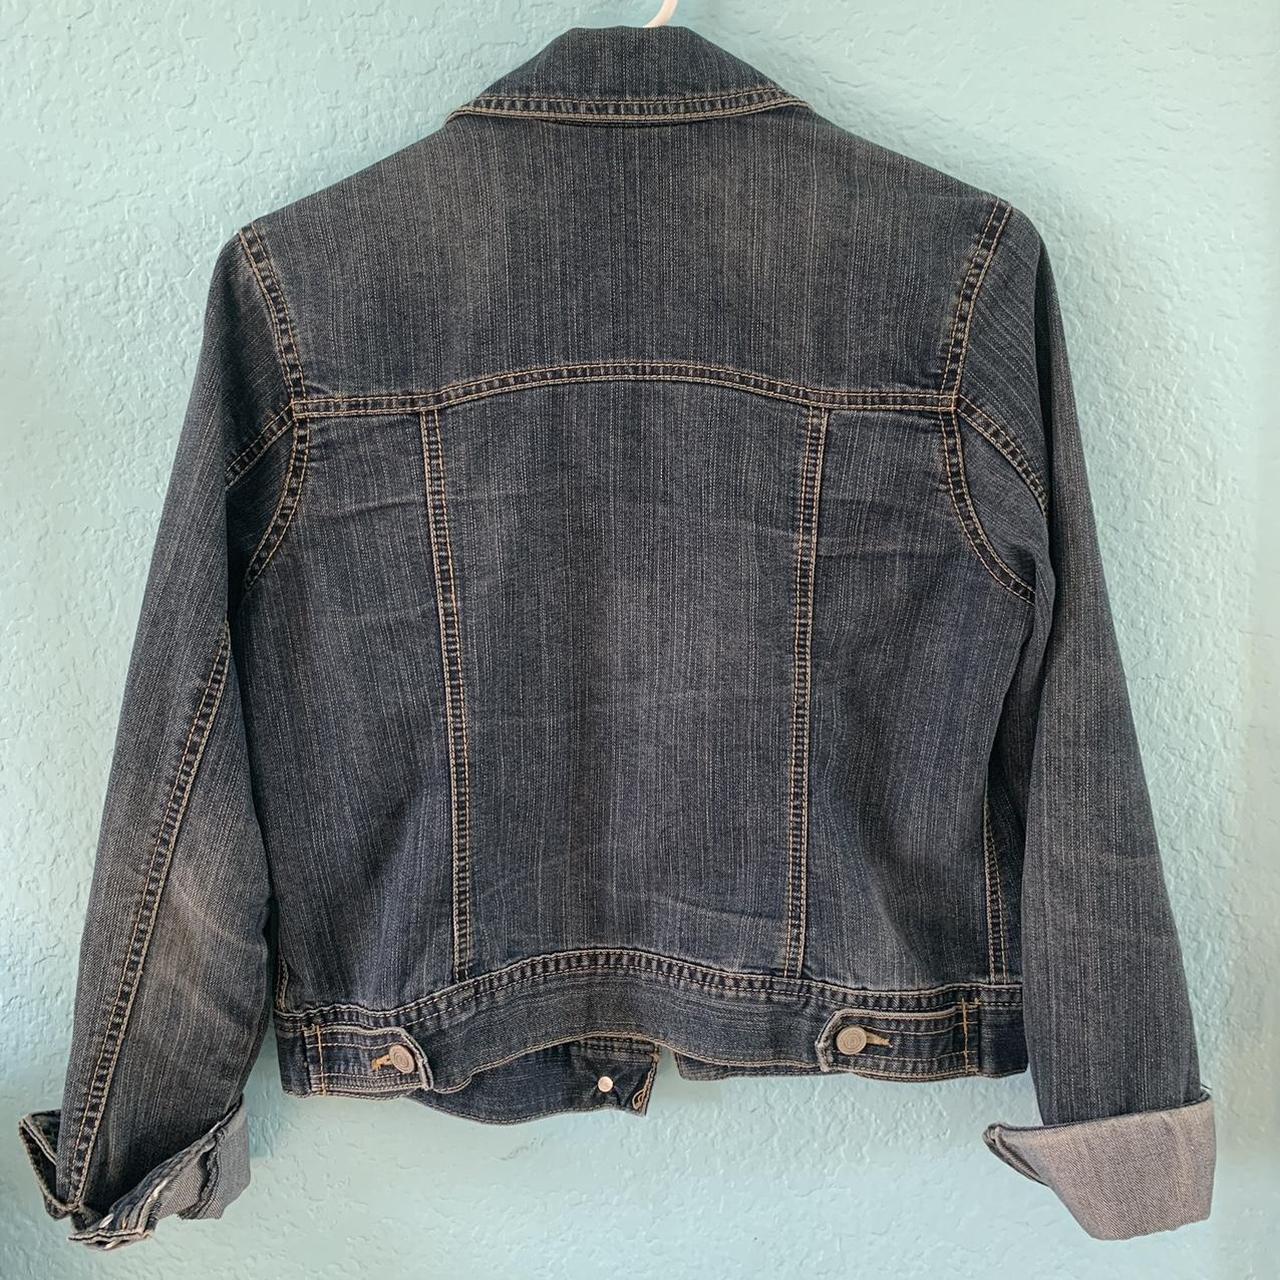 Product Image 3 - Dark denim jacket with silver